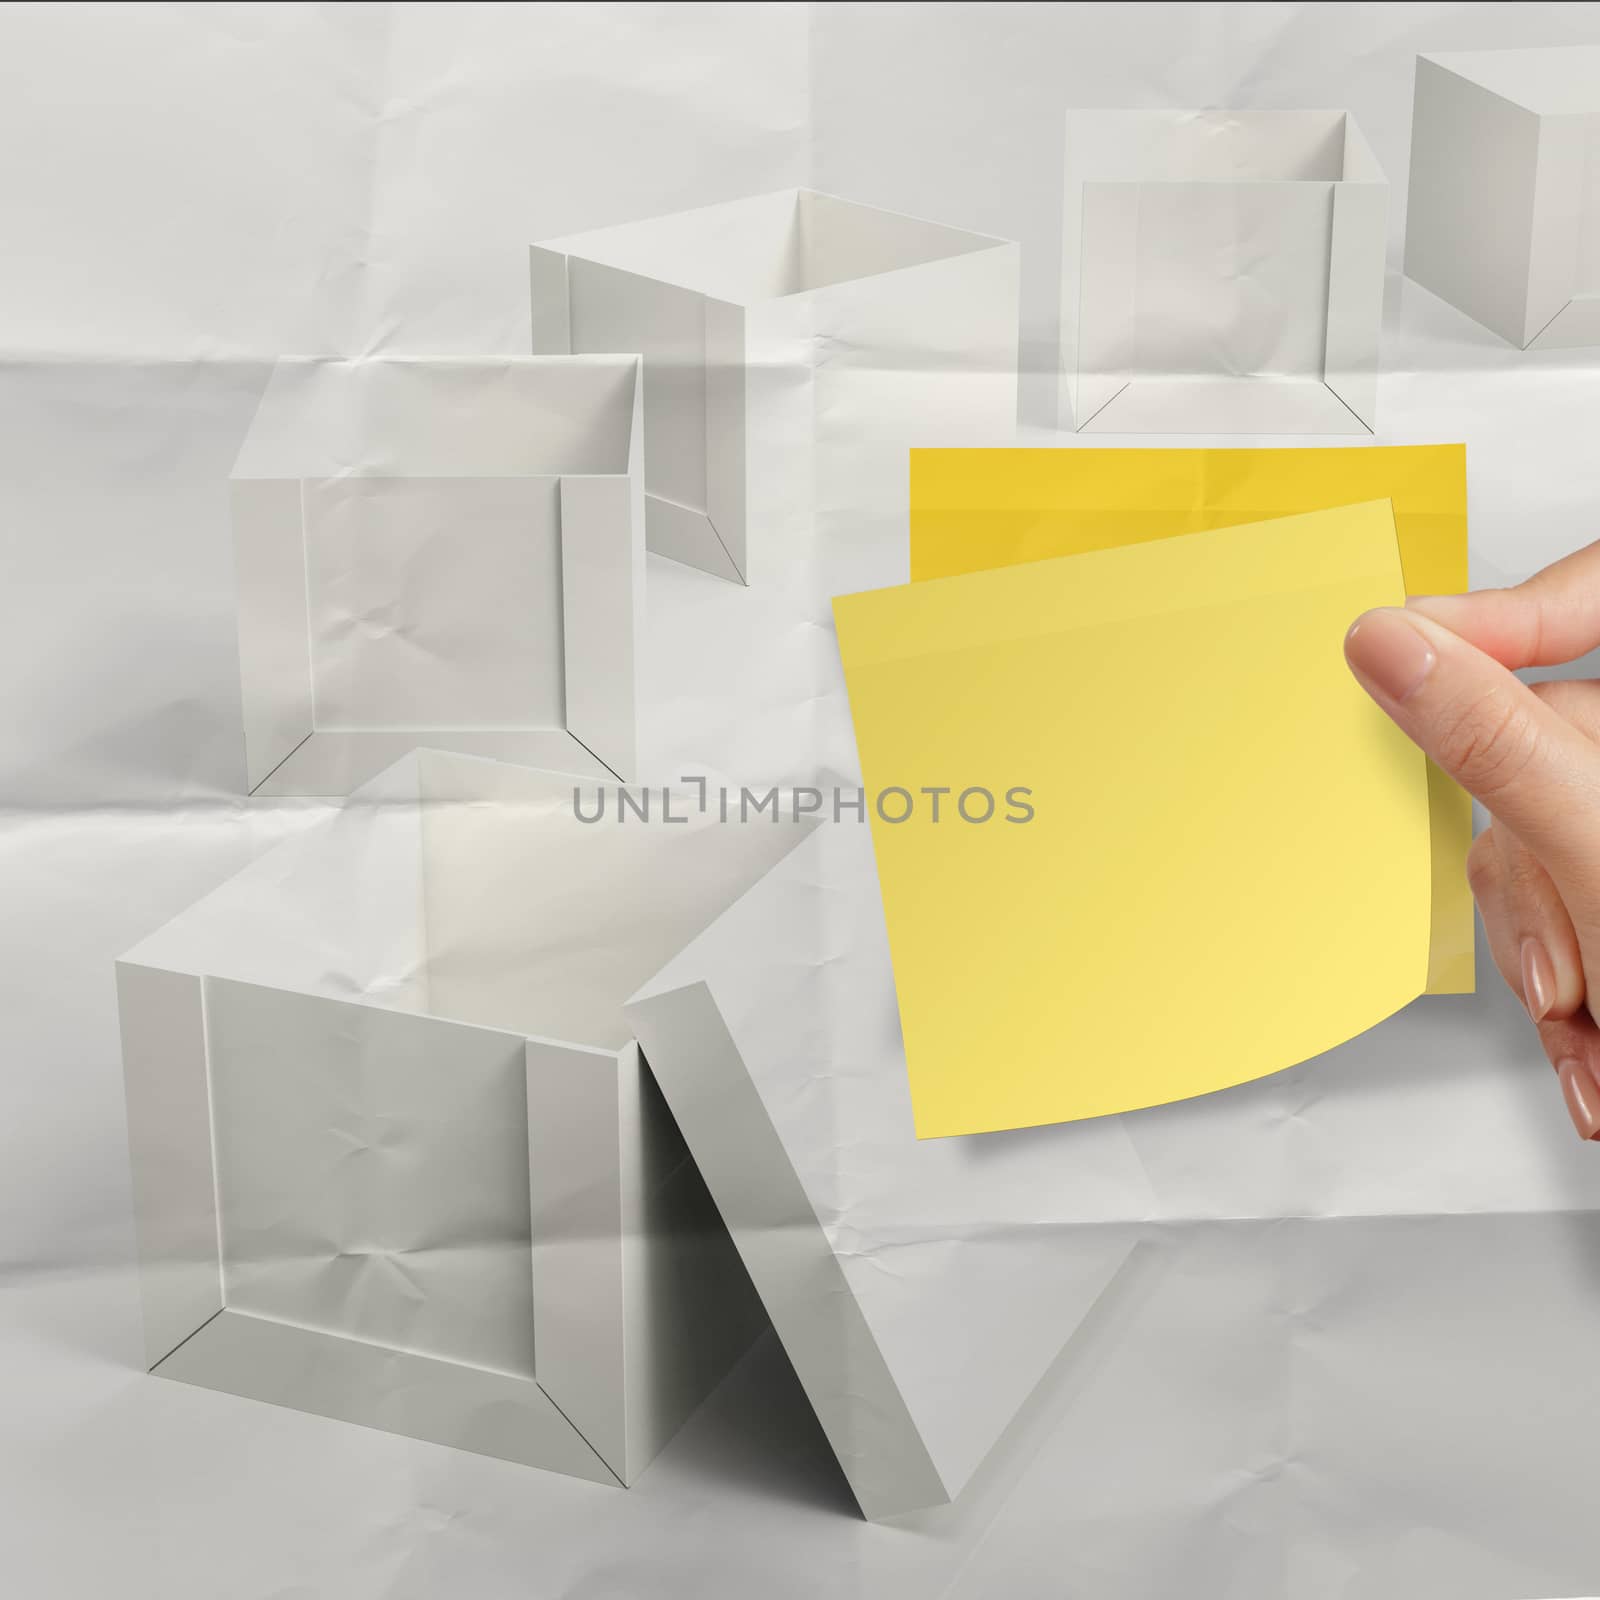 thinking outside the box on crumpled sticky note paper  by everythingpossible